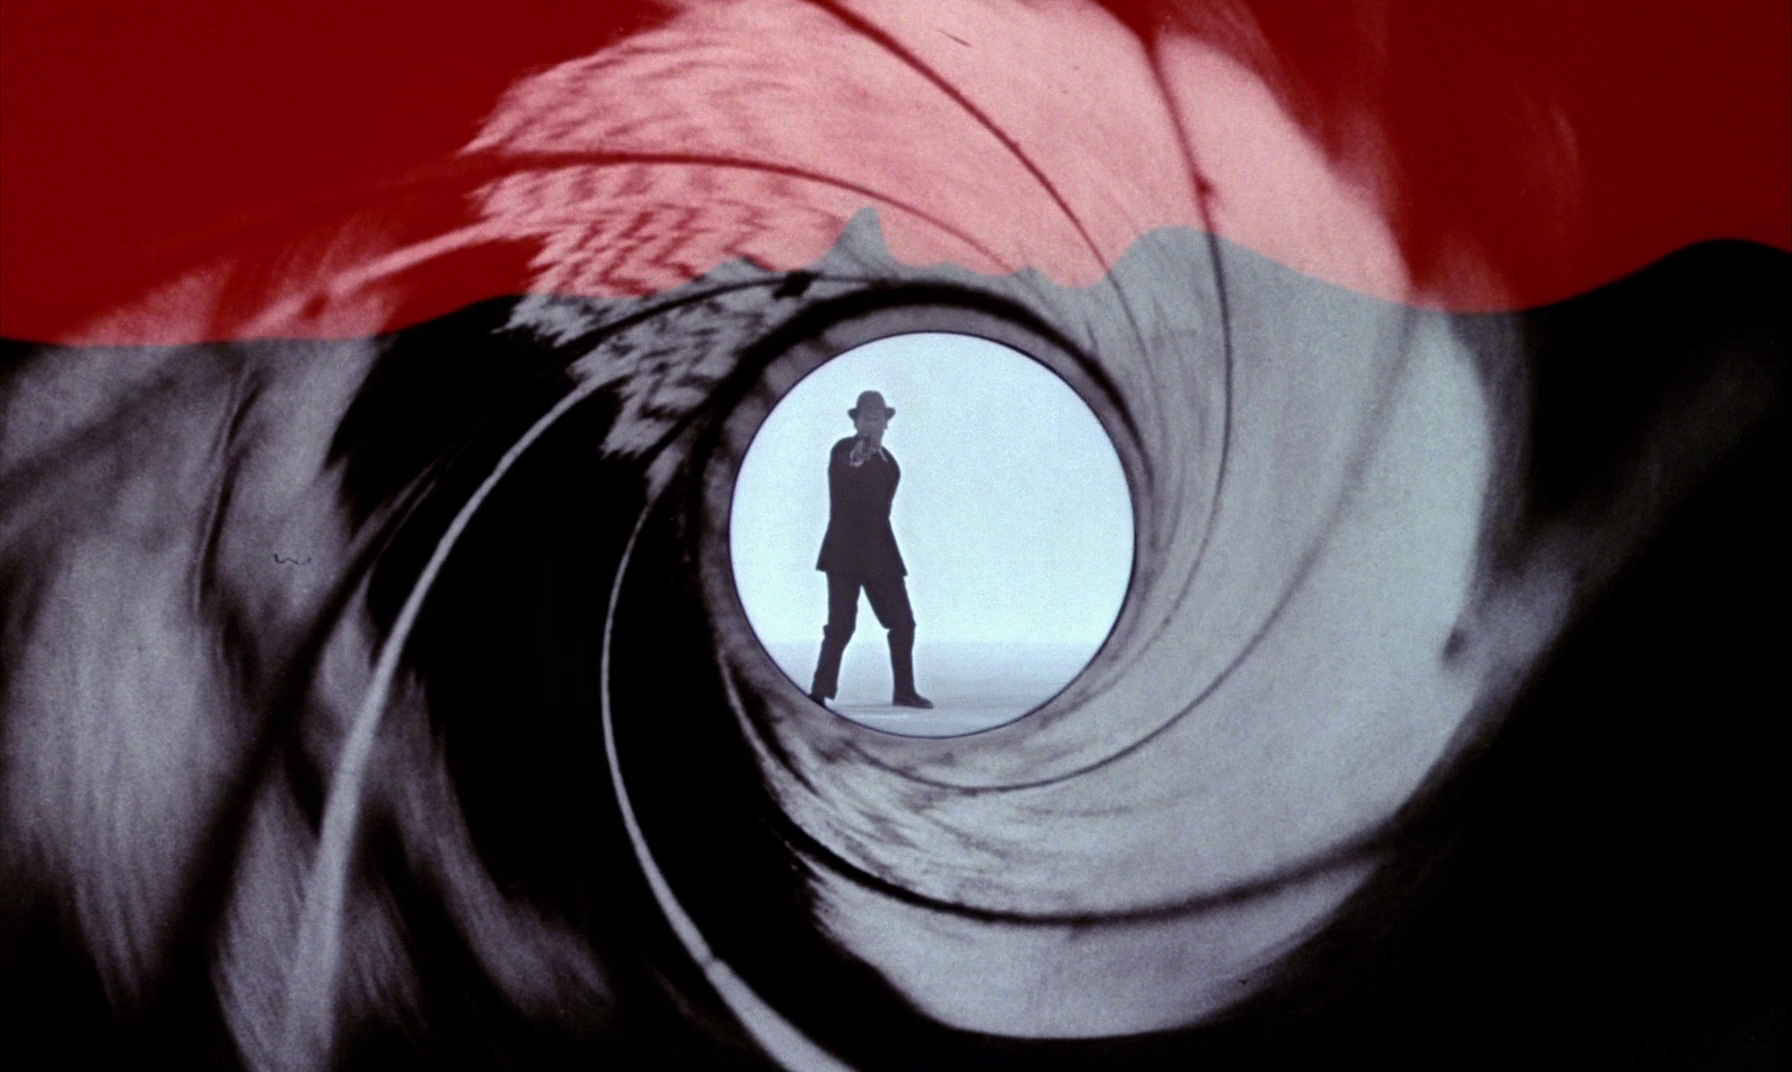 The opening of the first 007 film "Dr. No", Bond (in the picture is not Sean Connery, but his stuntman Ben Simmons) appeared in the swirl window of the barrel, shooting the classic look at the audience